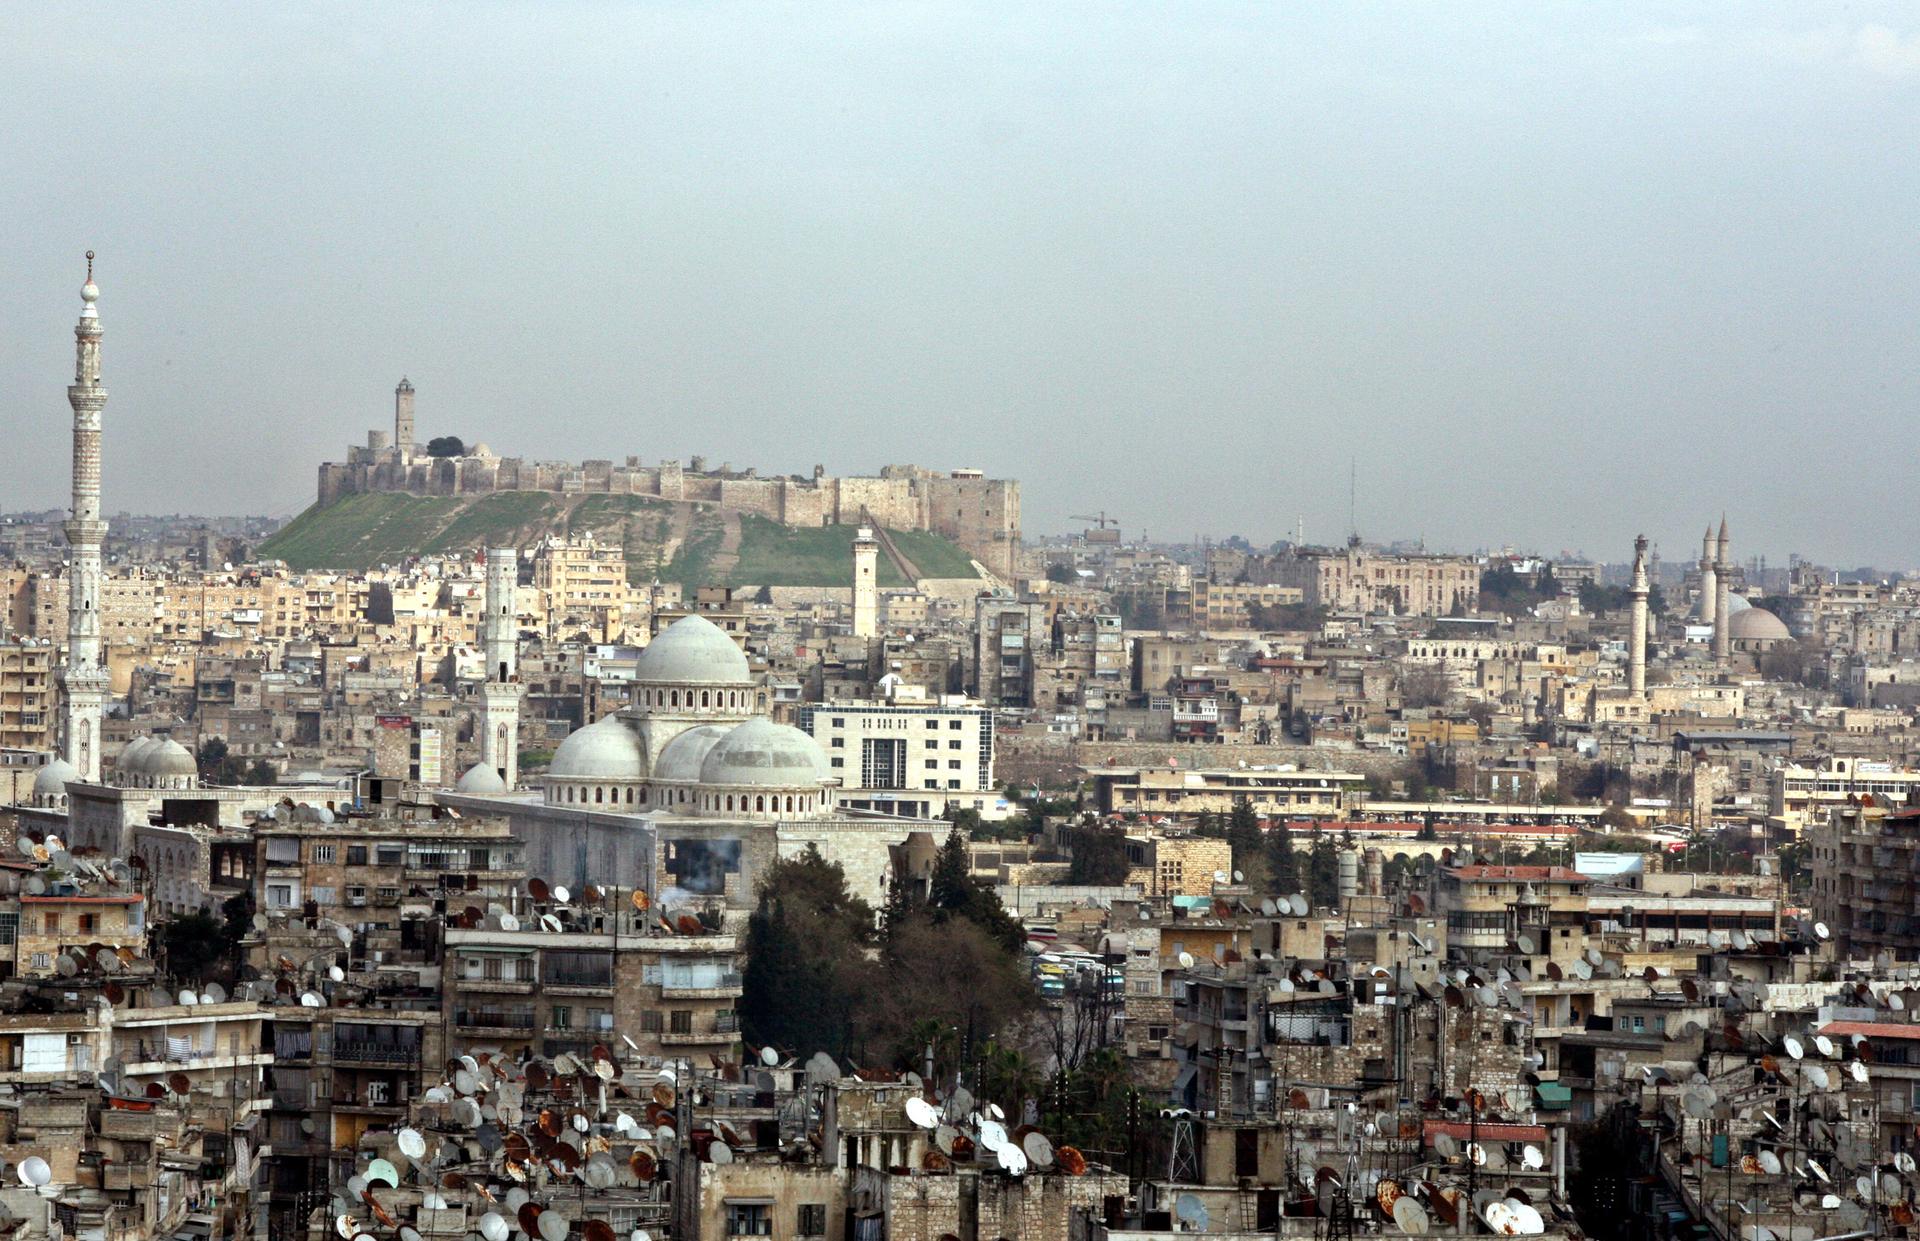 Old Aleppo, looking toward the citadel, before the war. Many of the minarets and ancient buildings have been damaged or destroyed in the civil war.